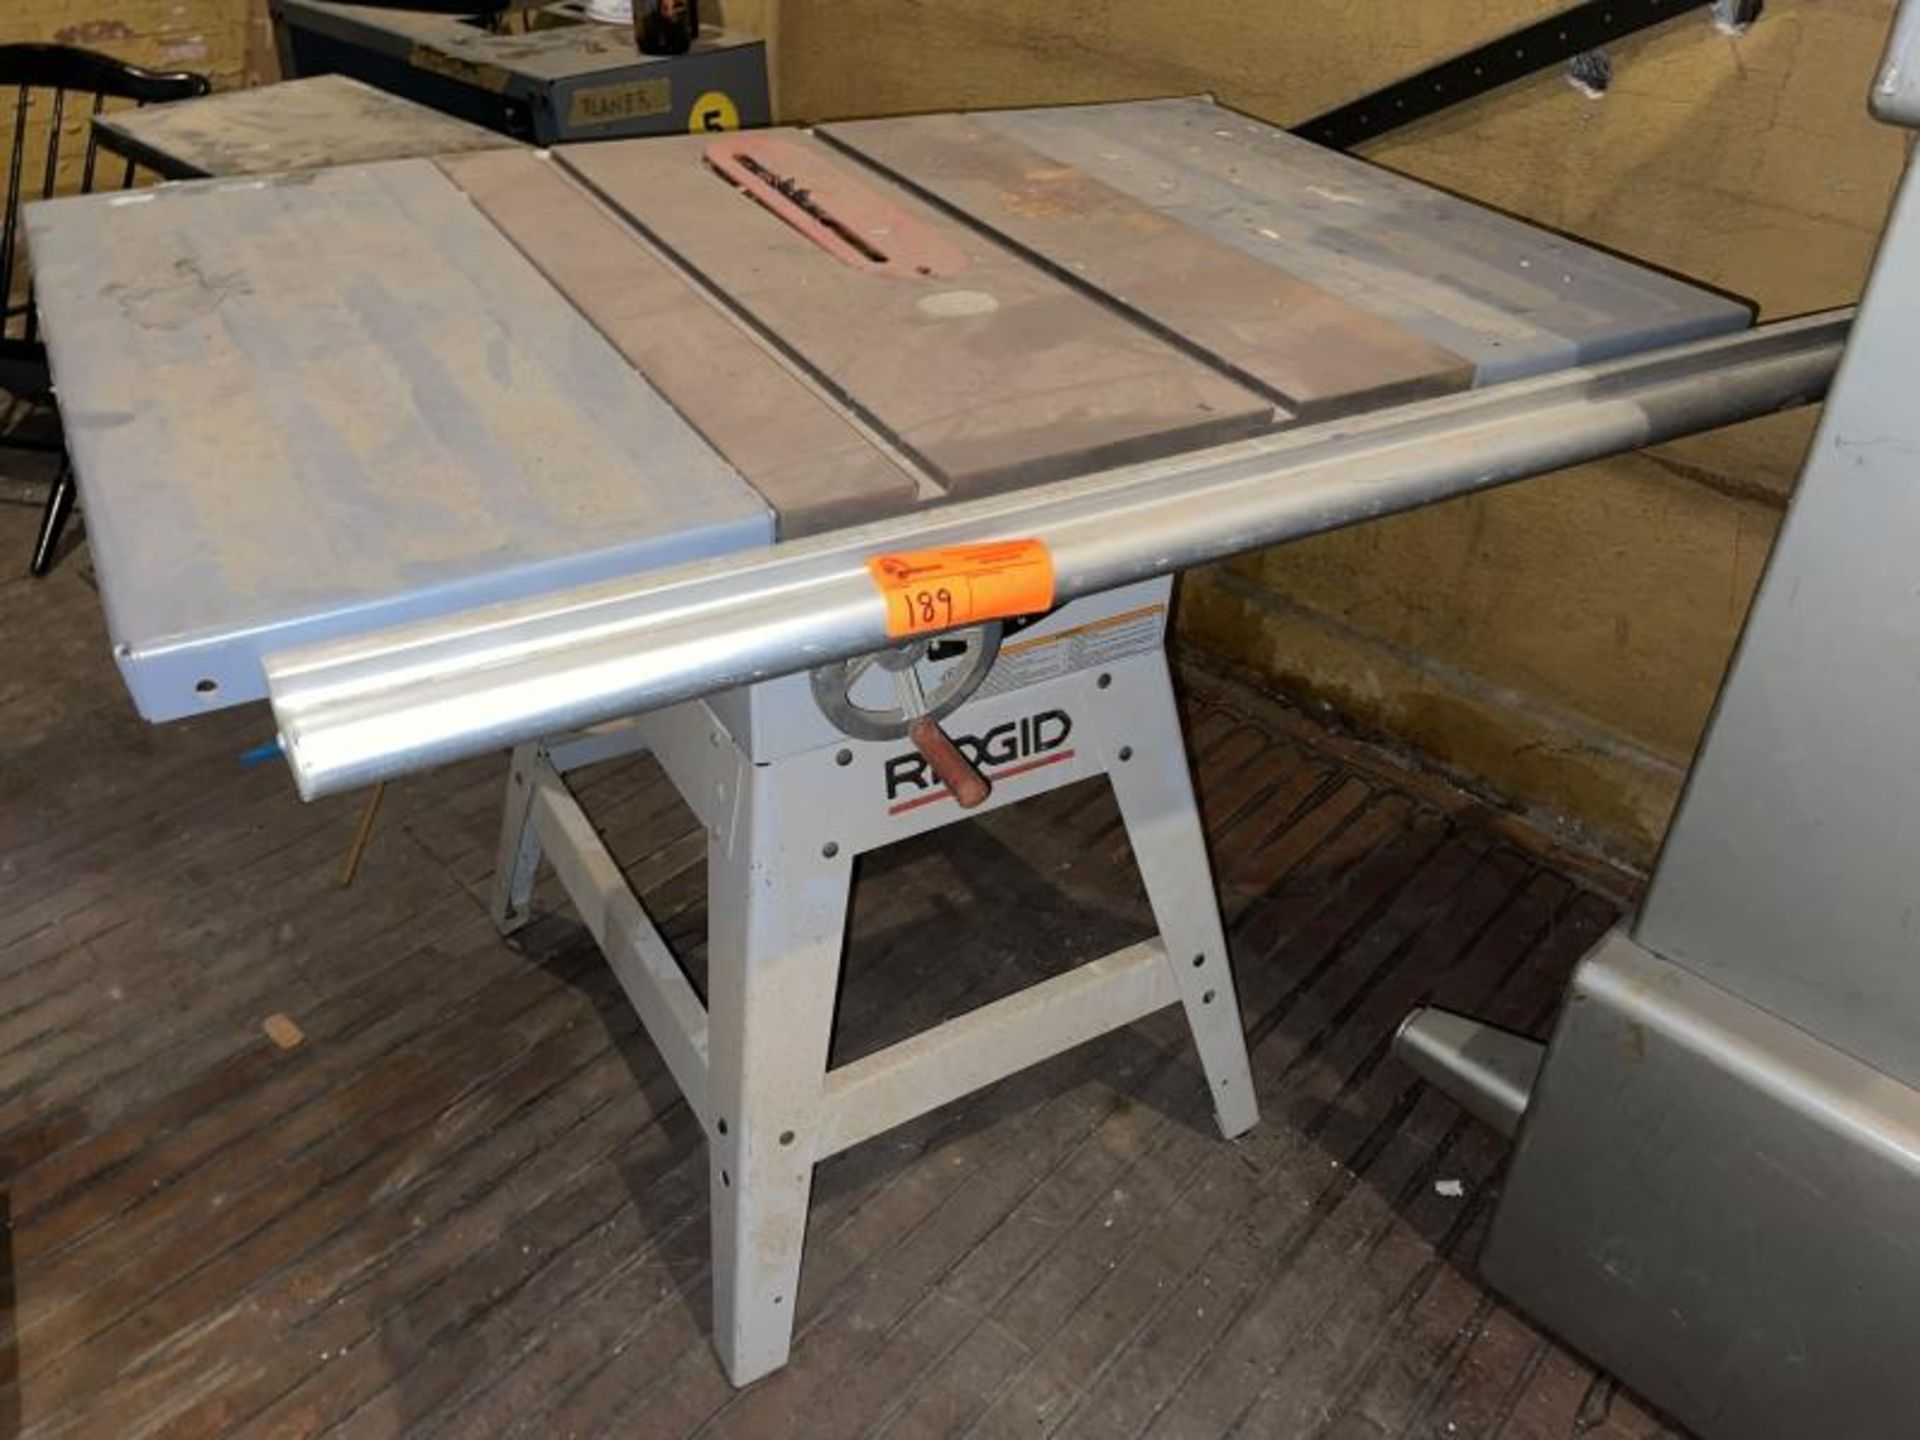 Rigid Table Saw M: TS-241209 On Second Floor Custom Come Down Narrow Staircase, or Hole In Floor